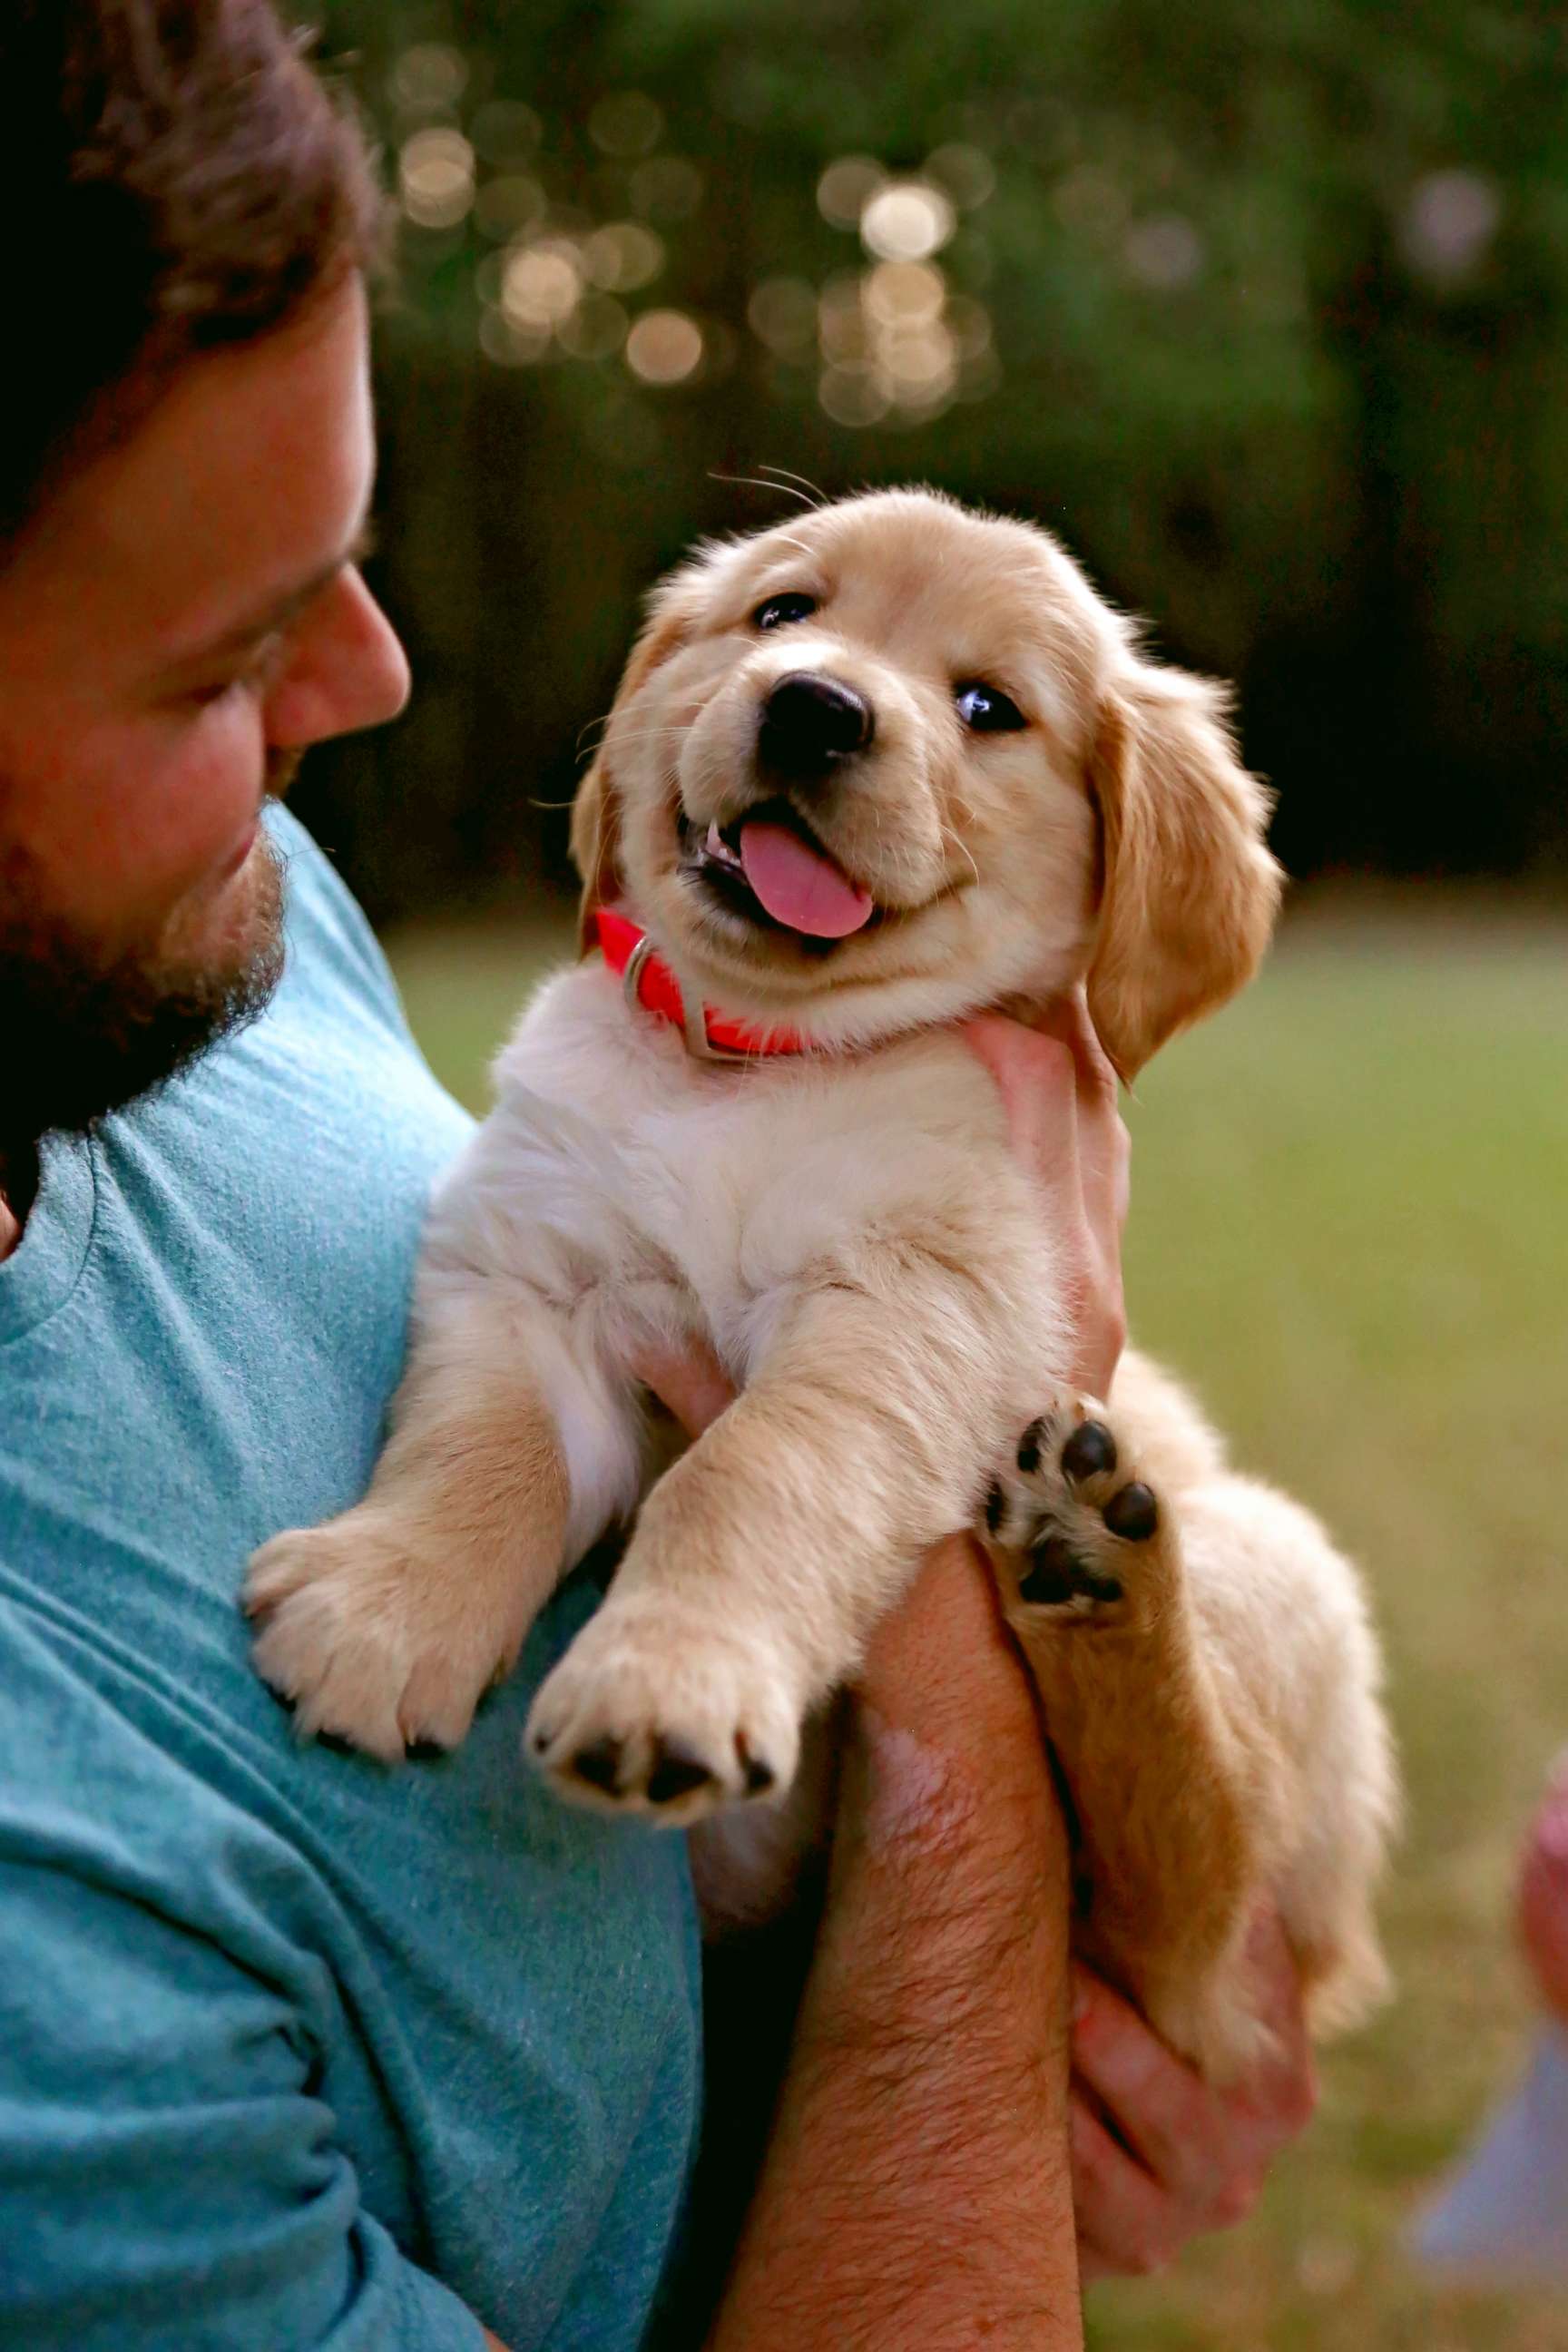 PHOTO: Davis Smith of Clemson, South Carolina, loves his new puppy, Molly, so much, he hired a professional photographer to capture photos.